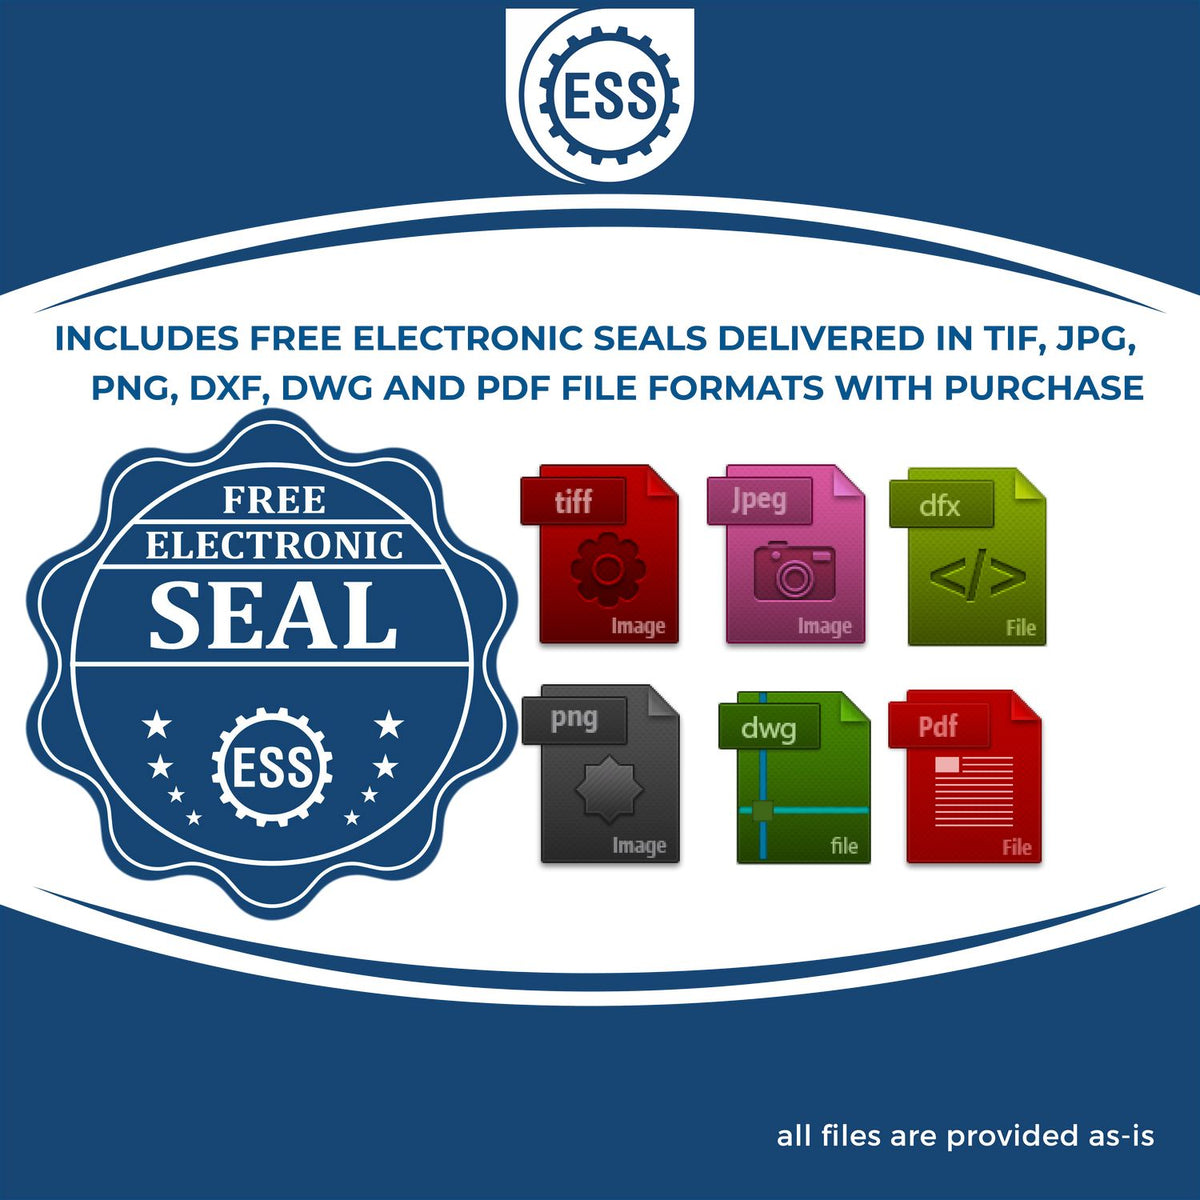 An infographic for the free electronic seal for the Self-Inking New Hampshire Landscape Architect Stamp illustrating the different file type icons such as DXF, DWG, TIF, JPG and PNG.